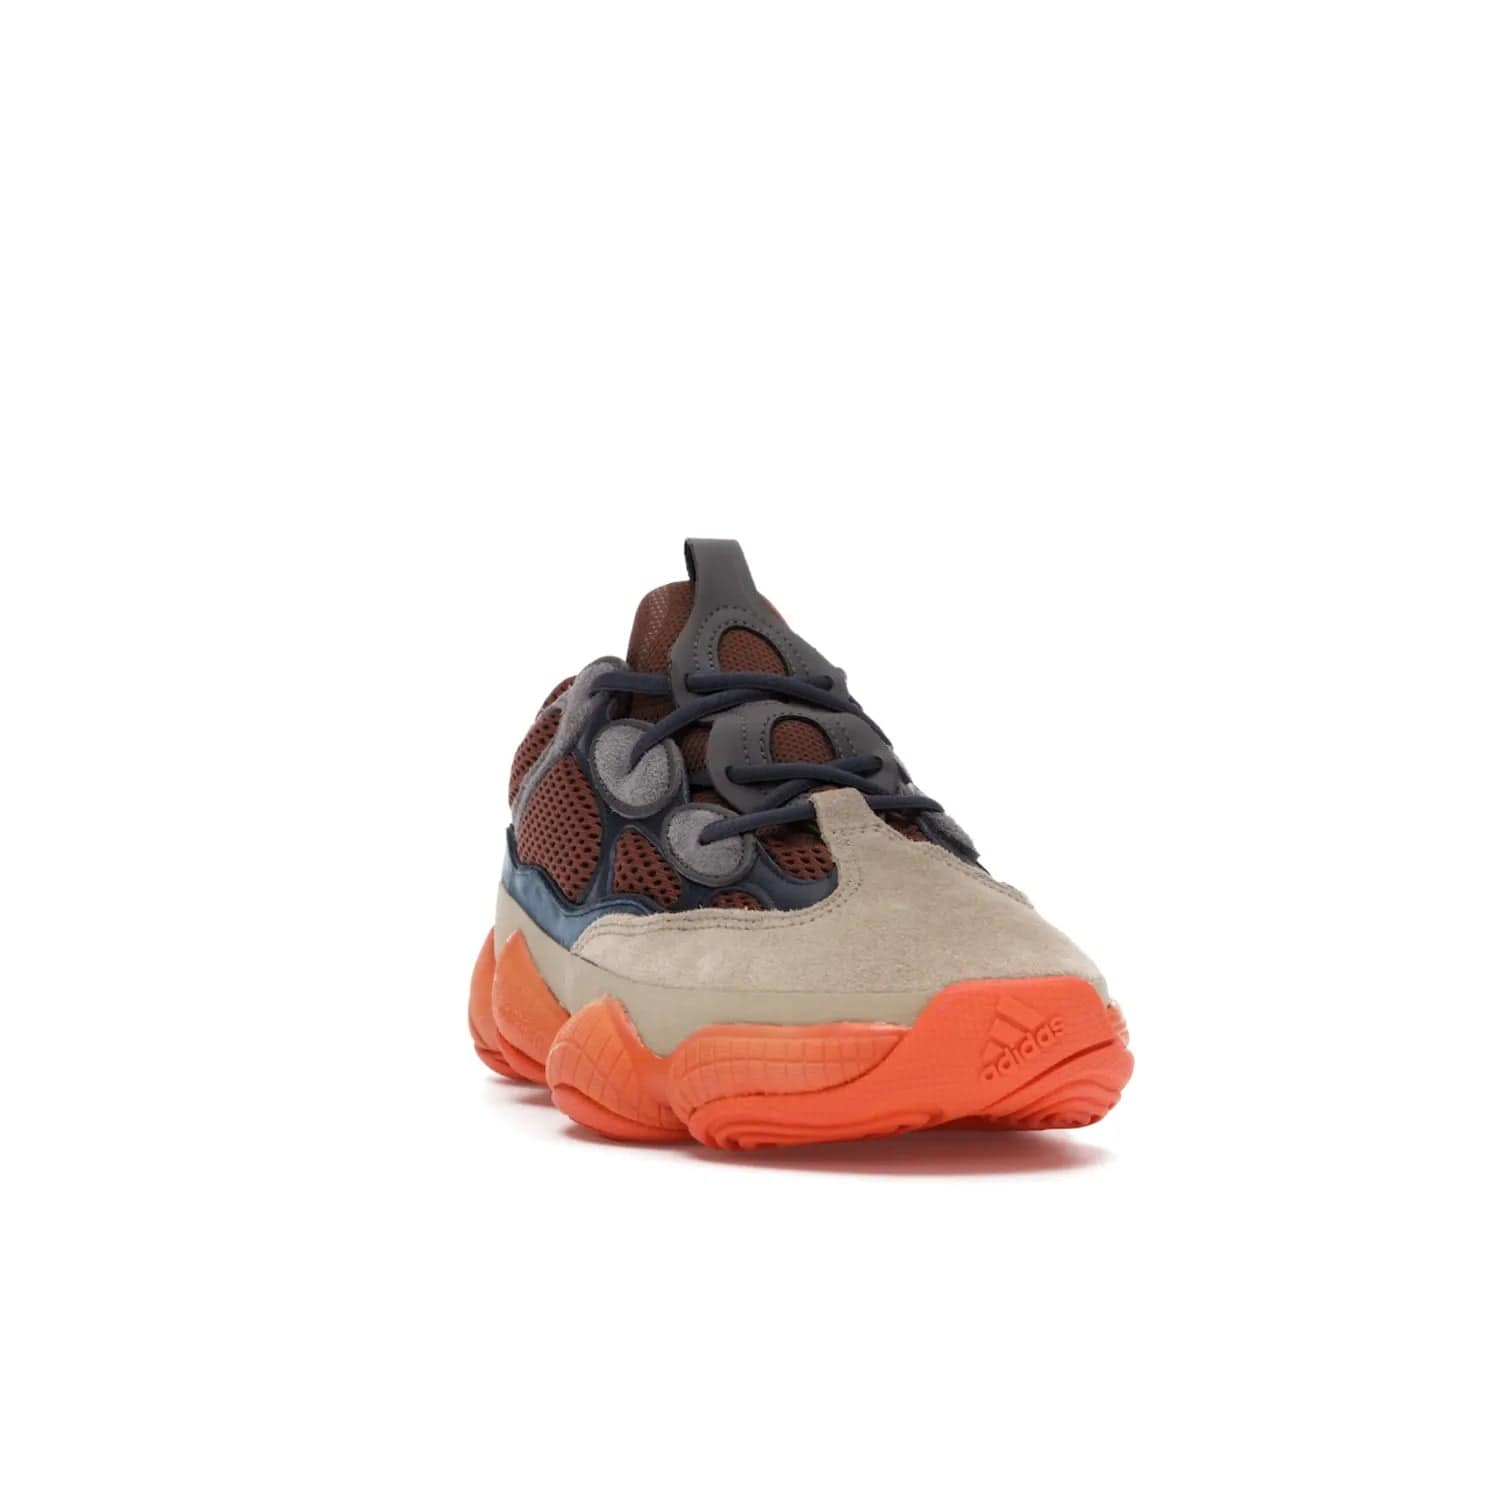 adidas Yeezy 500 Enflame - Image 8 - Only at www.BallersClubKickz.com - Step into style with the adidas Yeezy 500 Enflame. Mix of mesh, leather, and suede layered together to create tonal-brown, dark blue, & orange. Orange AdiPRENE sole provides superior cushioning & comfort. Get yours and experience maximum style.